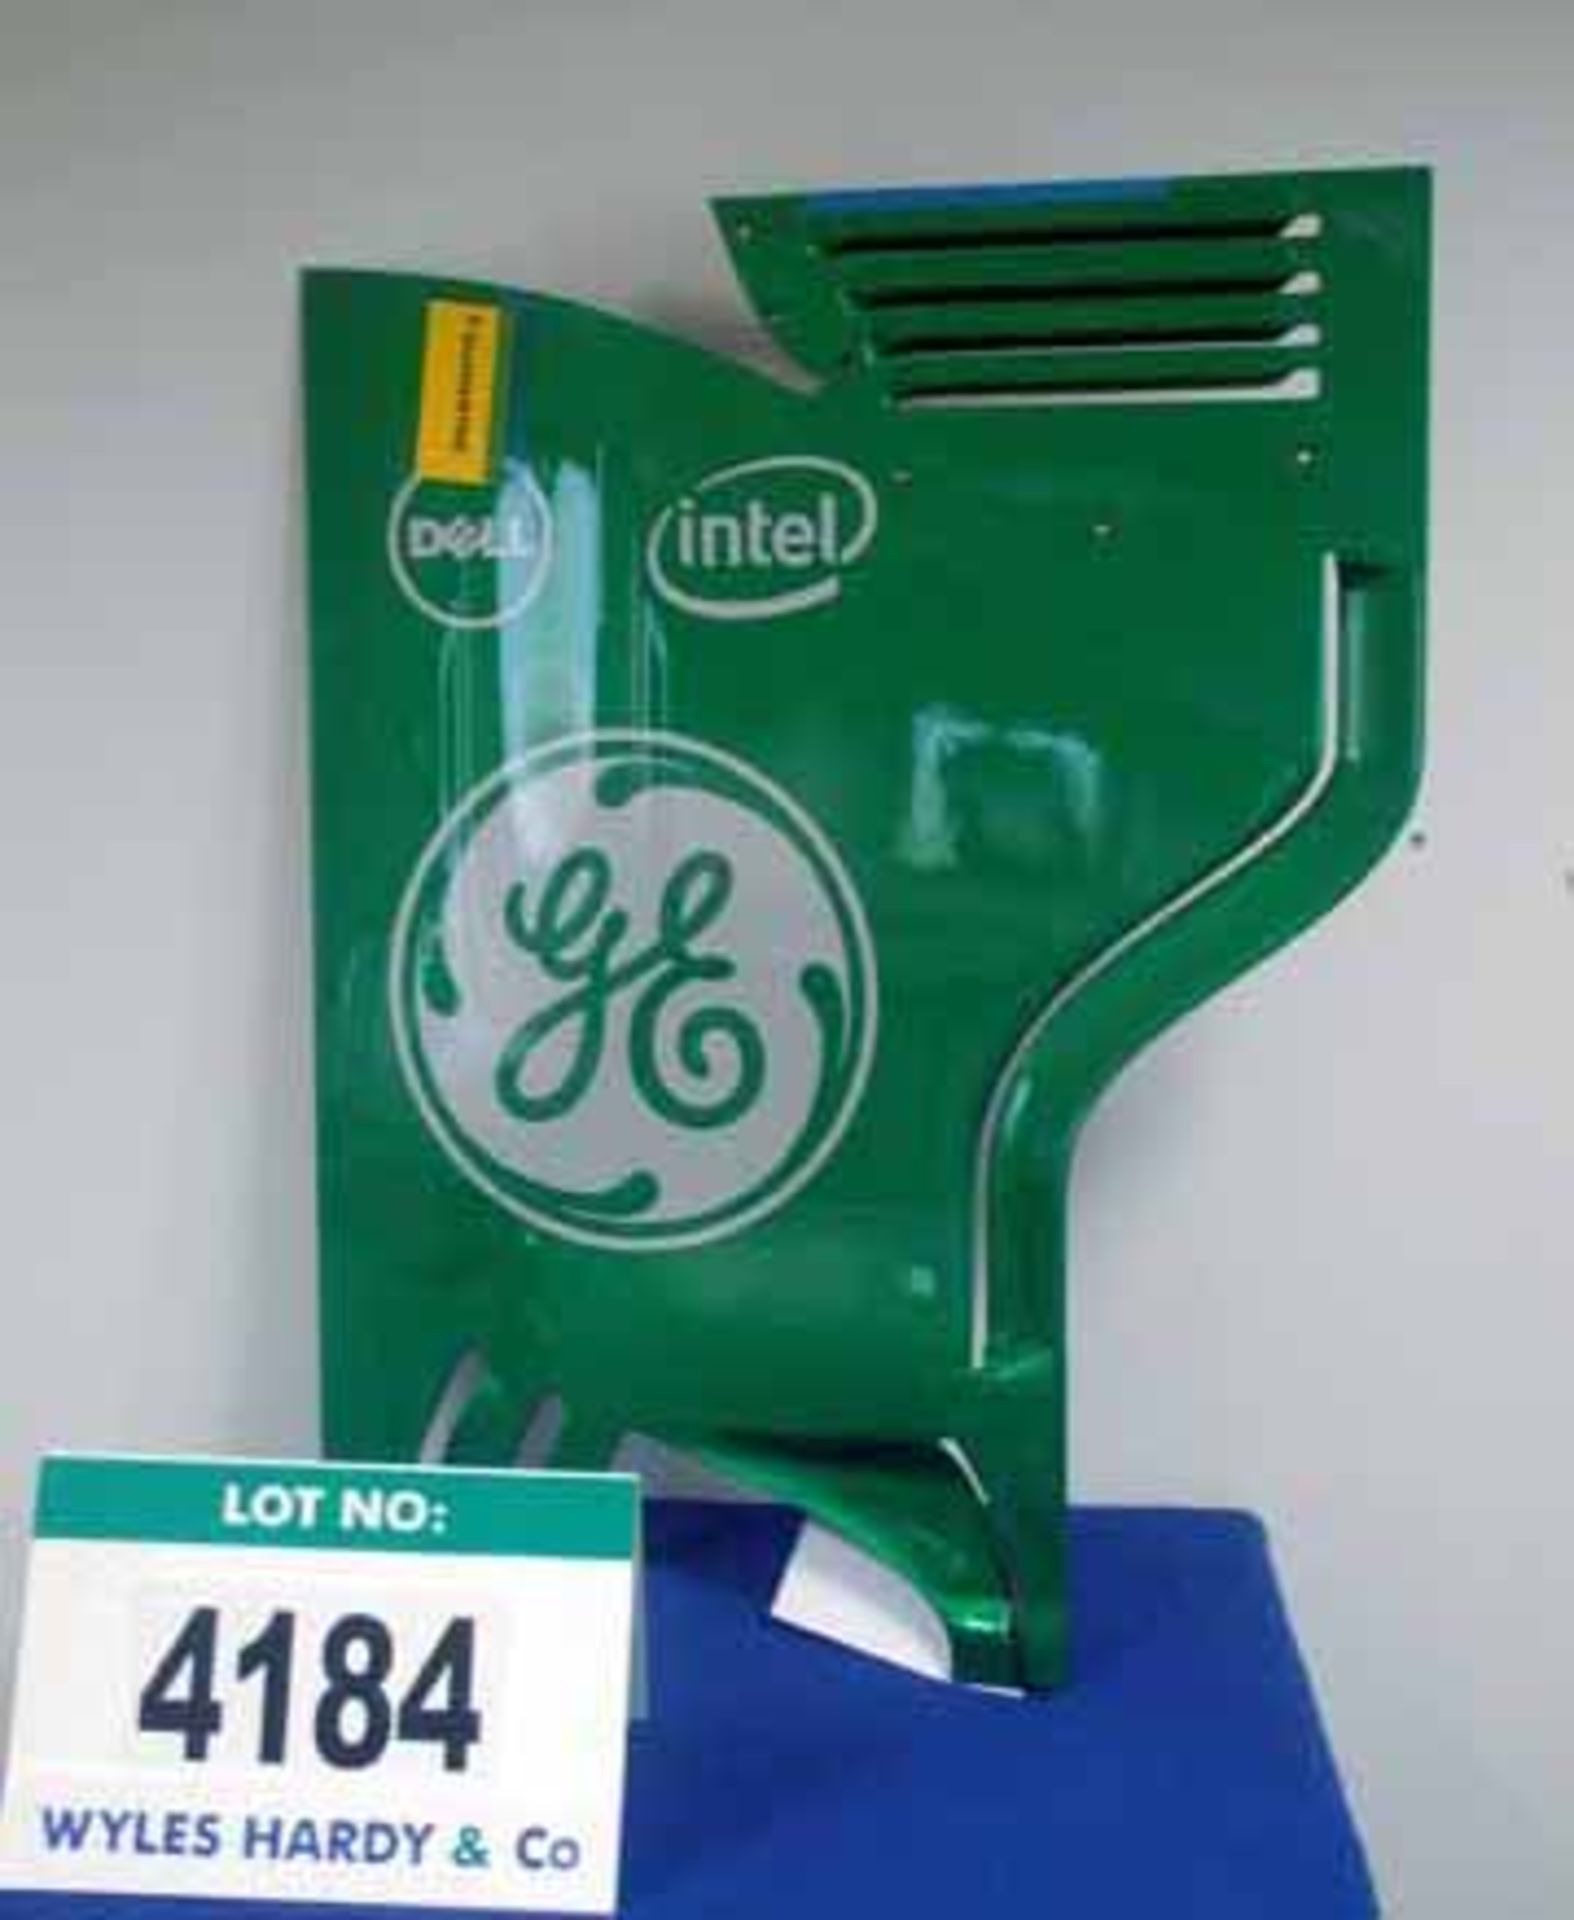 A CATERHAM 2014 Carbon Fibre Right Wing End Plate with GE, DELL & INTEL Logos,